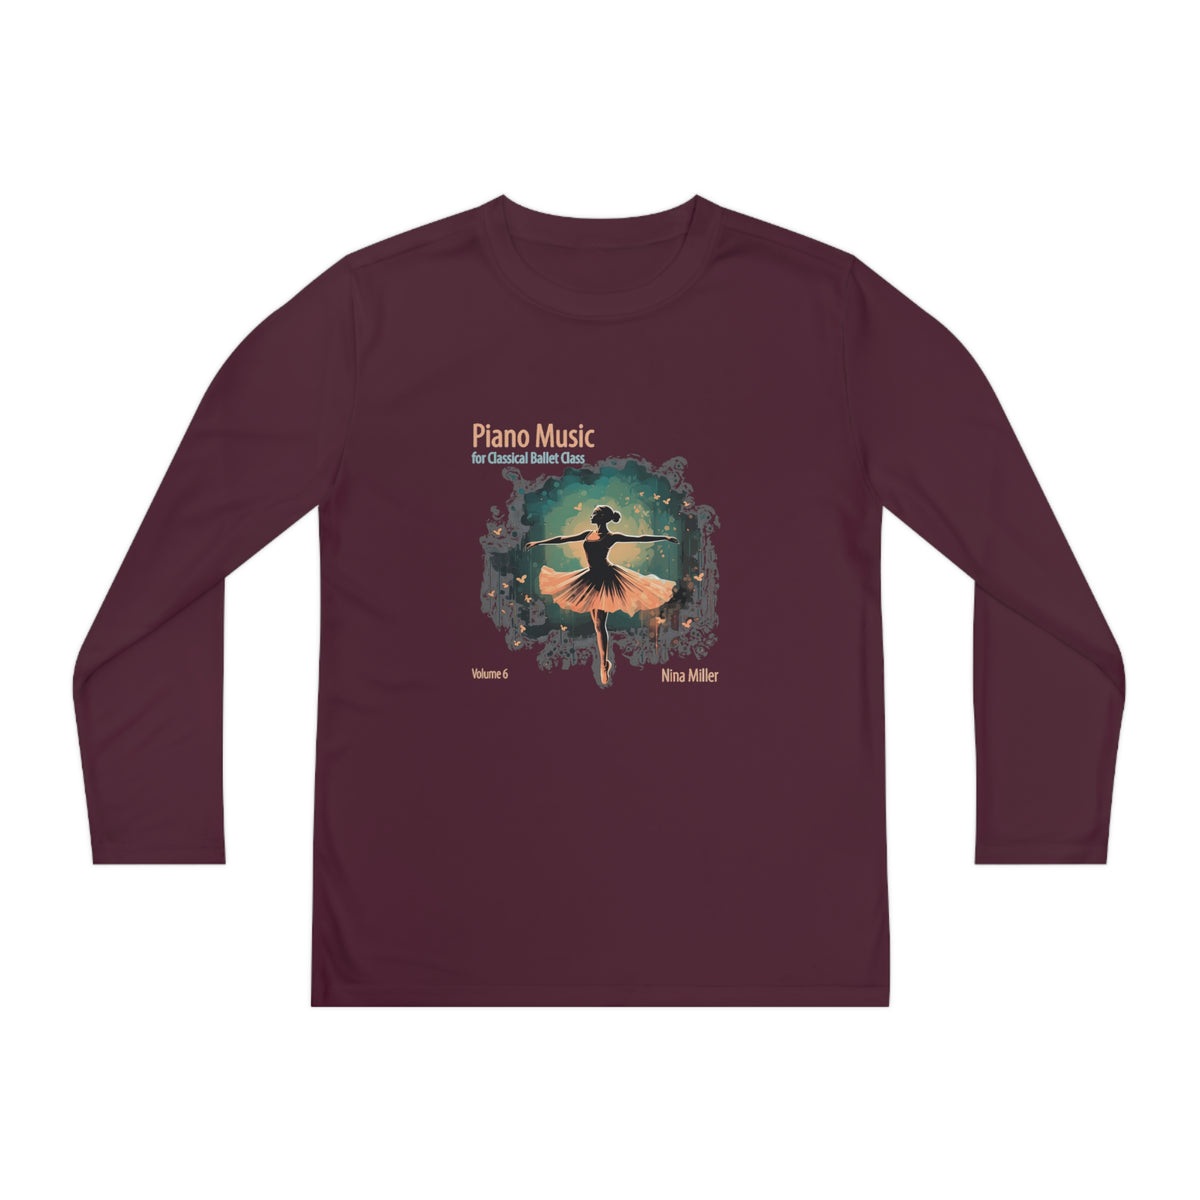 Piano Music for Classical Ballet Class Vol. 6 - Youth Long Sleeve Competitor Tee